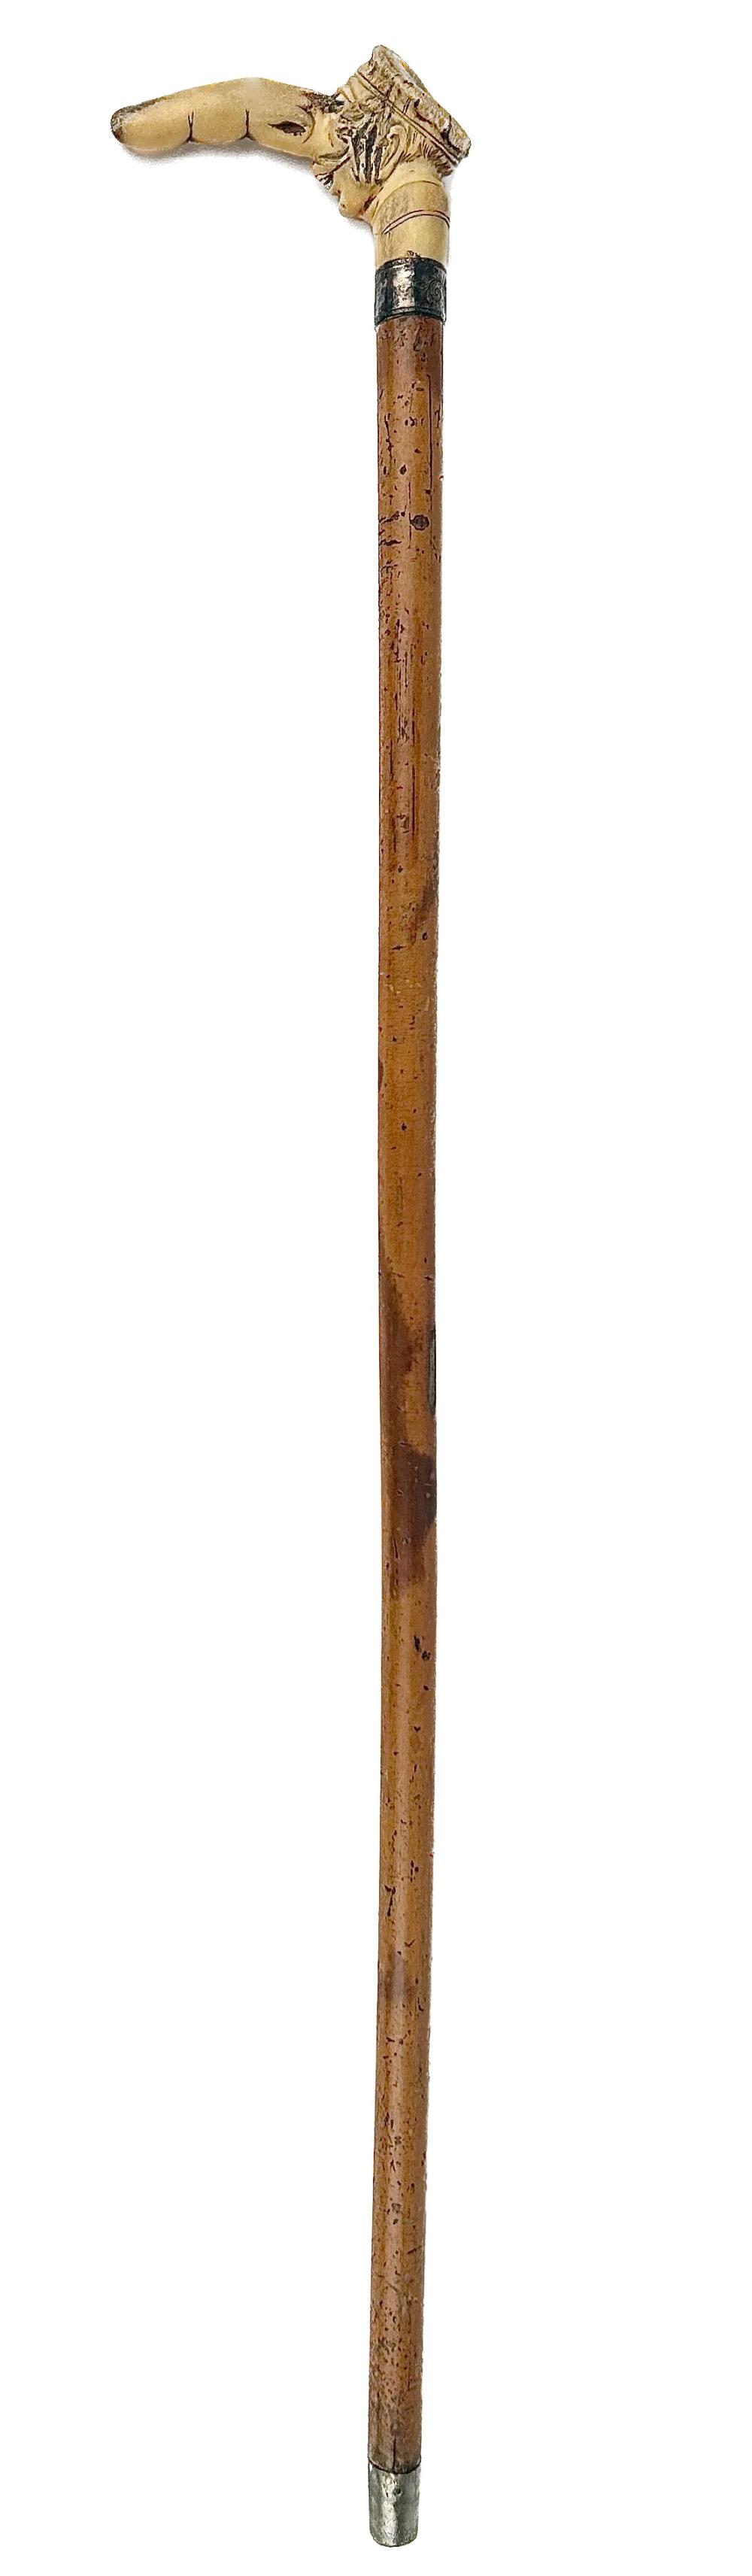 CARICATURE STAGHORN-HANDLED CANE